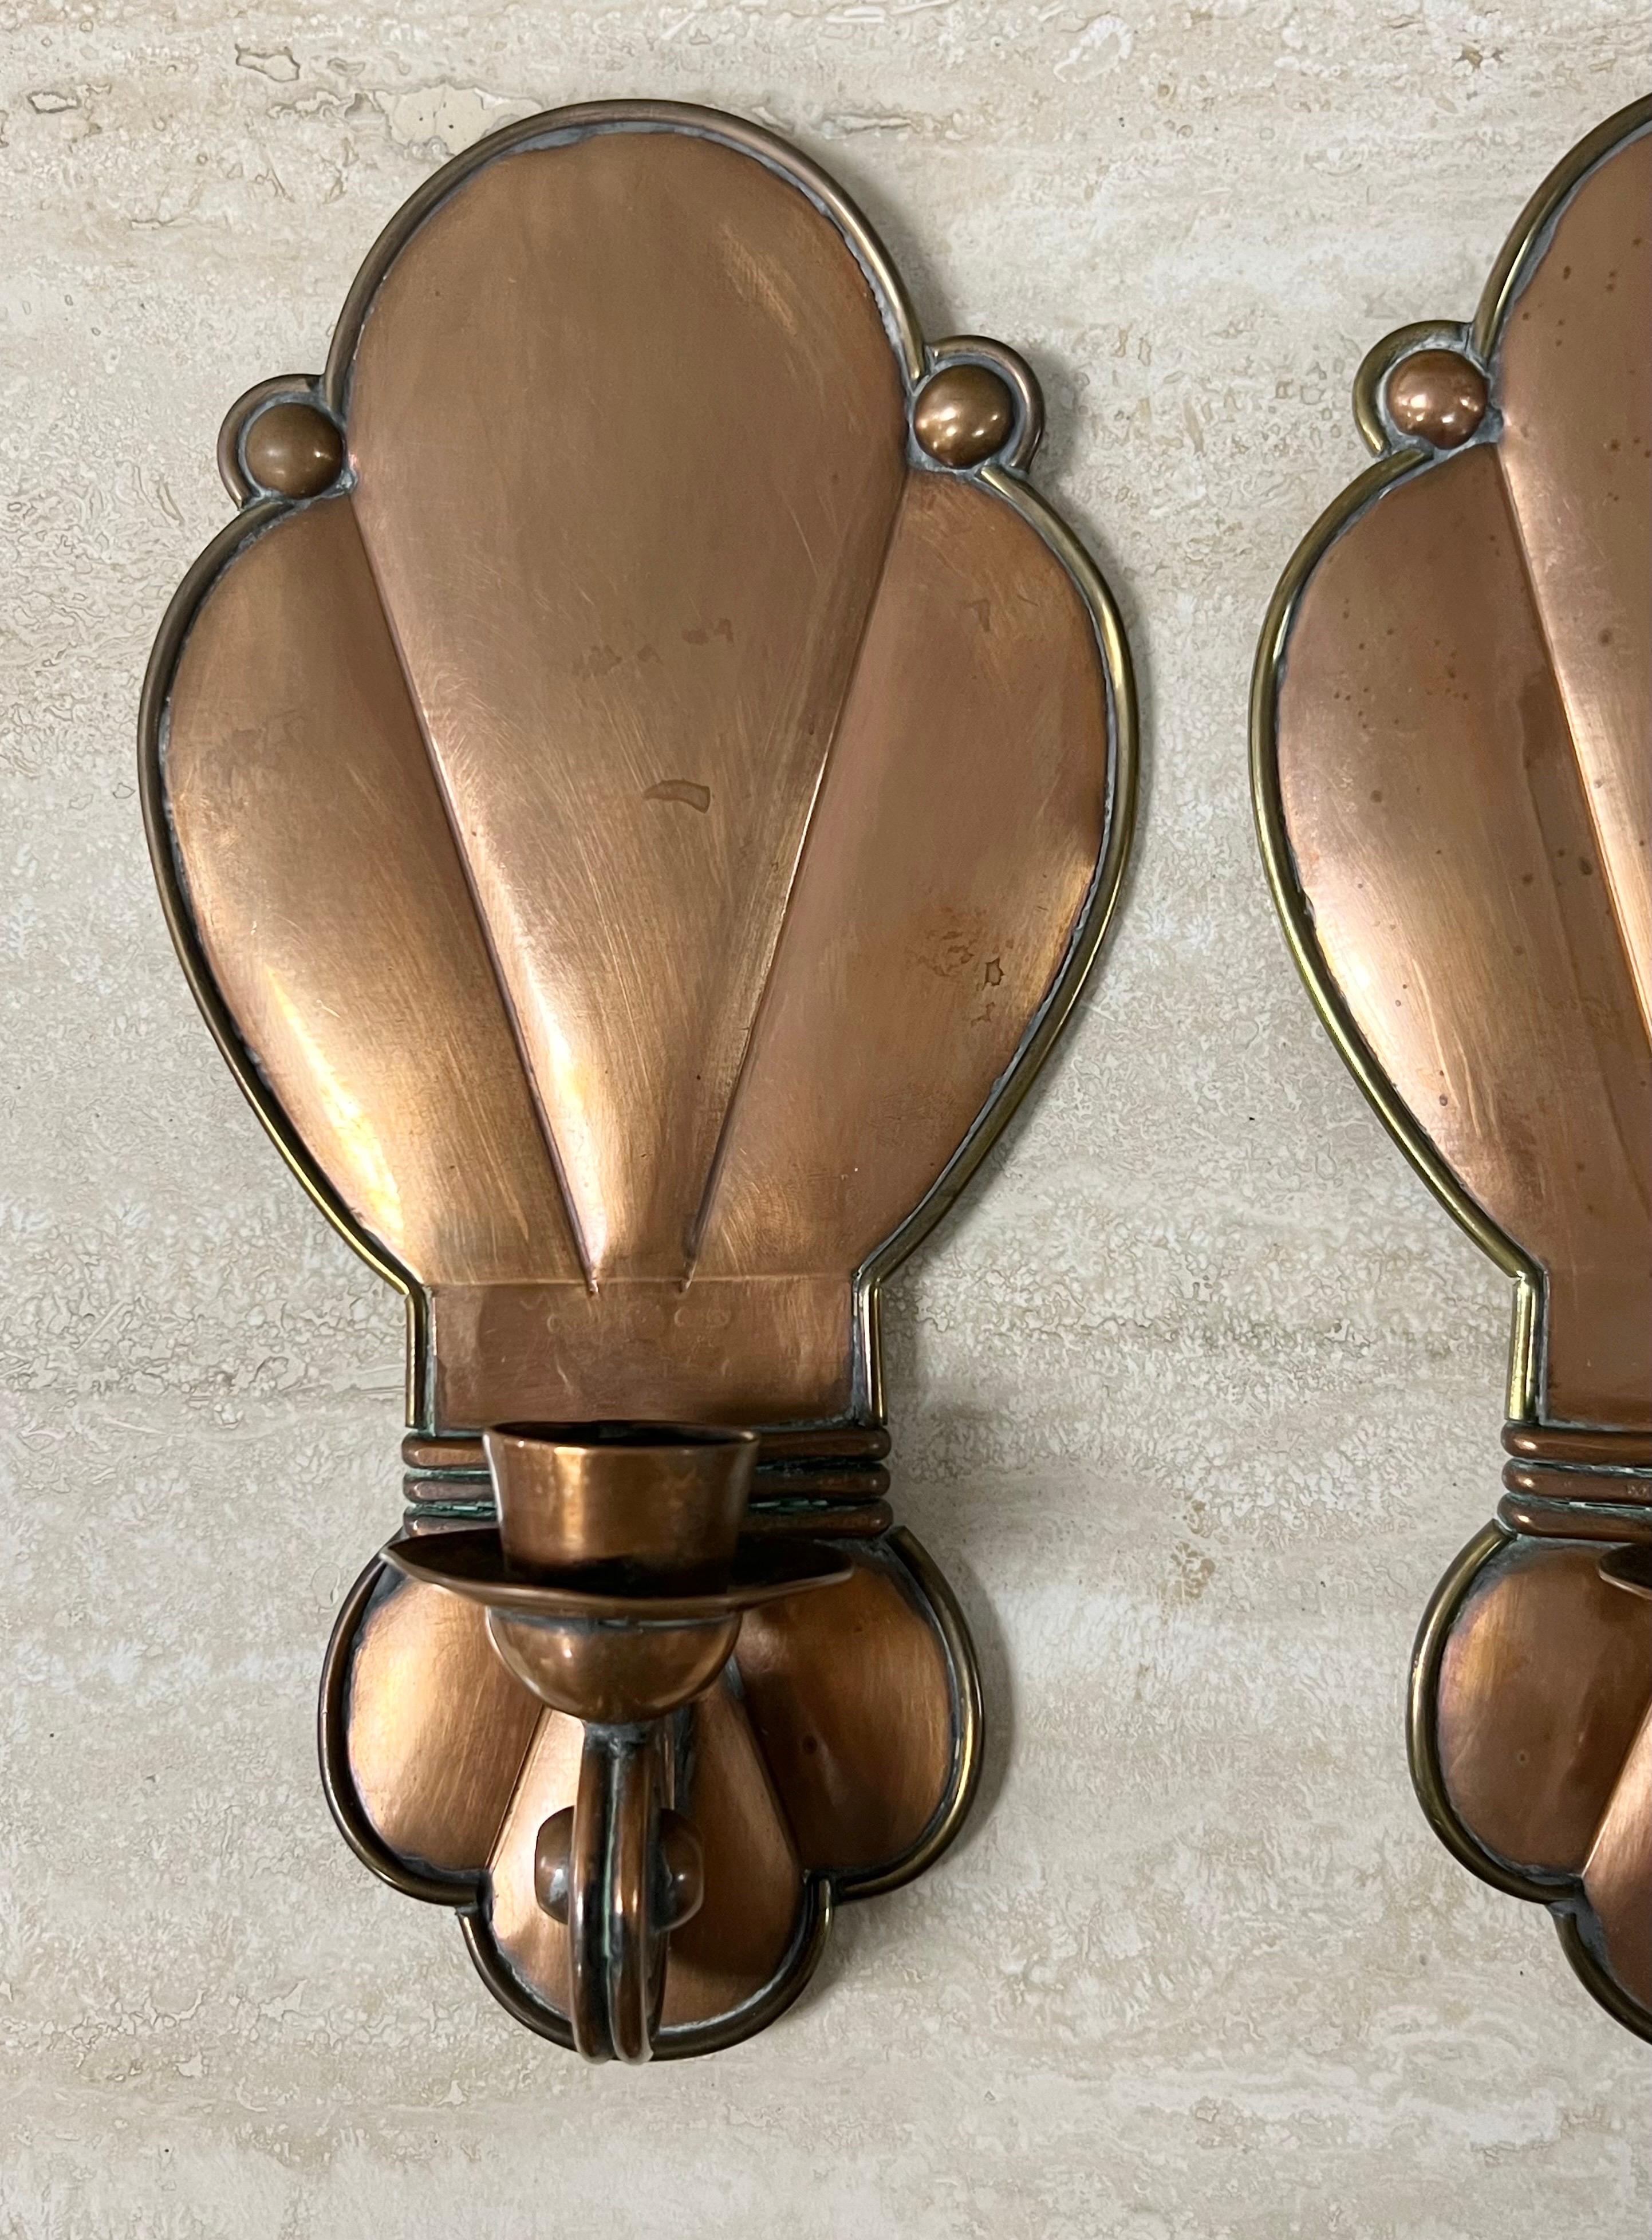 A pair of handcrafted copper sconces by Mexican master Hector Aguilar. Elegant simplicity.